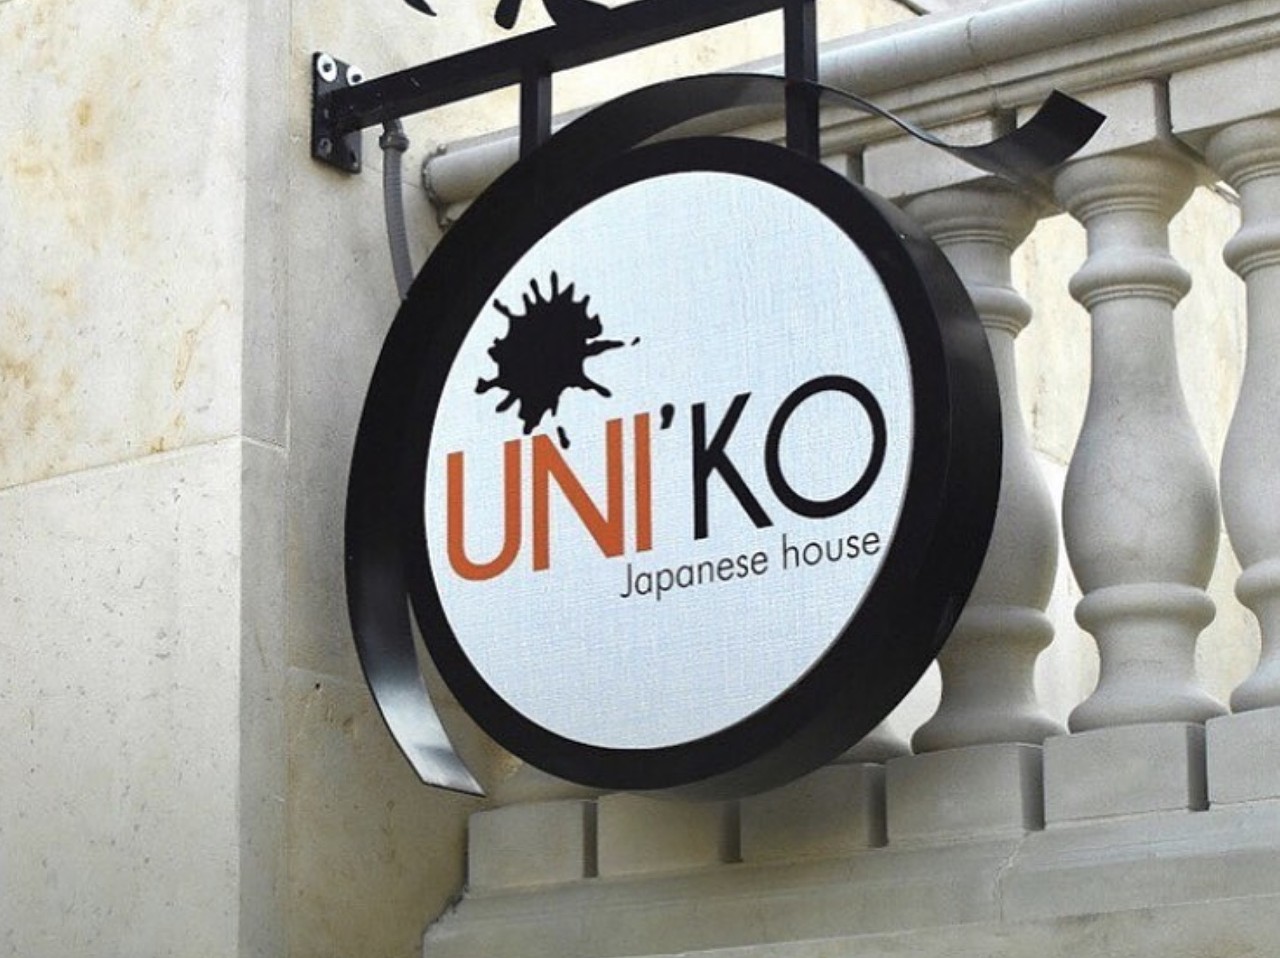 Uni’ko Japanese House
17803 La Cantera Terrace Suite 1101, (210) 239-6610, unikojapanesehouse.com
This Japanese-style sushi bar in the fancy AF retail complex Éilan just north of Six Flags offers a menu that’s spread across numerous appetizers, sushi rolls and plenty of nigiri and sashimi options.